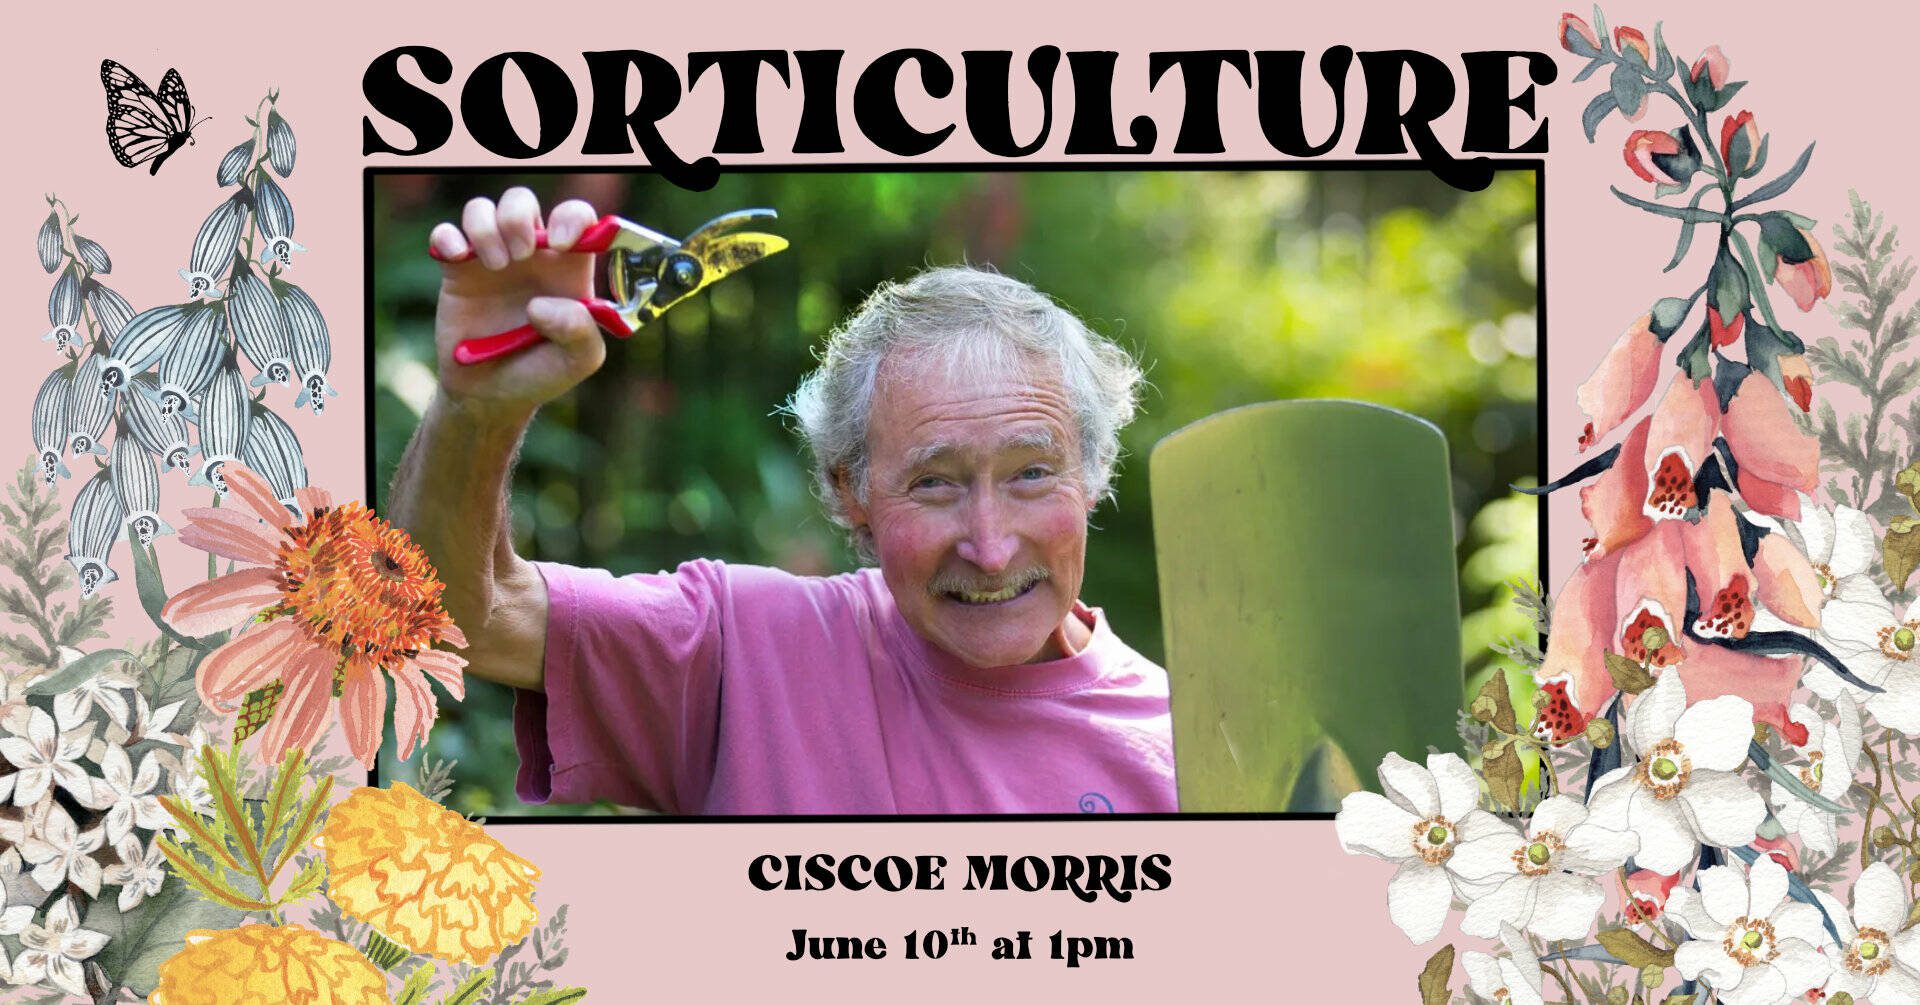 Ciscoe Morris, a longtime horticulturist and gardening expert, will speak at Sorticulture. (Photo provided by Sorticulture)